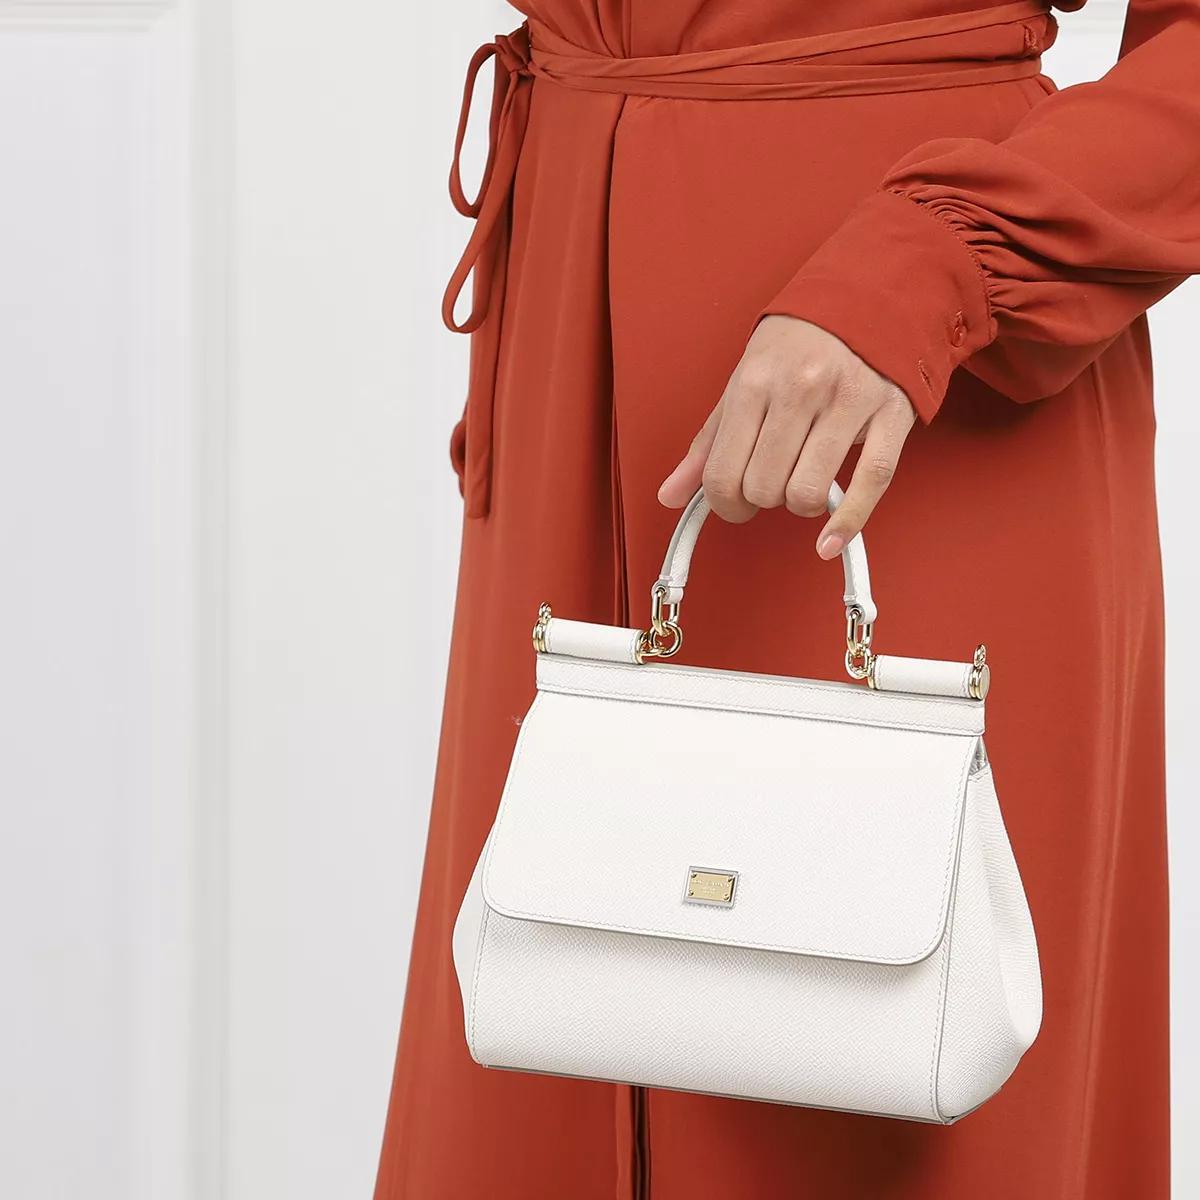 Dolce&Gabbana Small Sicily Bag Dauphine Leather White